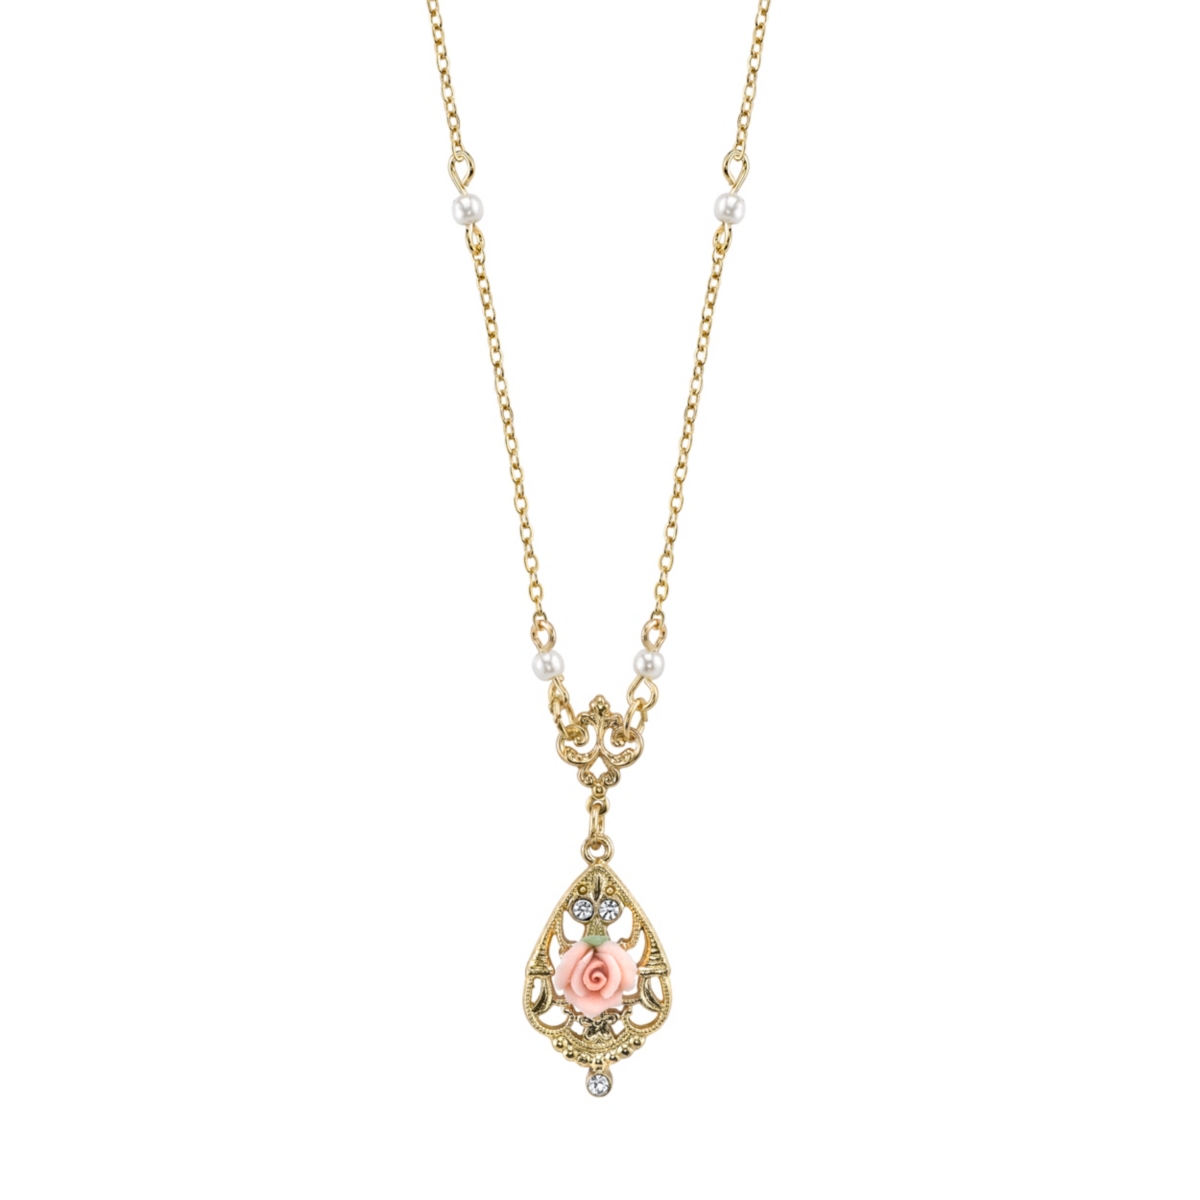 Vintage Style Jewelry, Retro Jewelry 2028 Gold-Tone Crystal and Pink Porcelain Rose Simulated Pearl Necklace 17 - Pink $25.20 AT vintagedancer.com